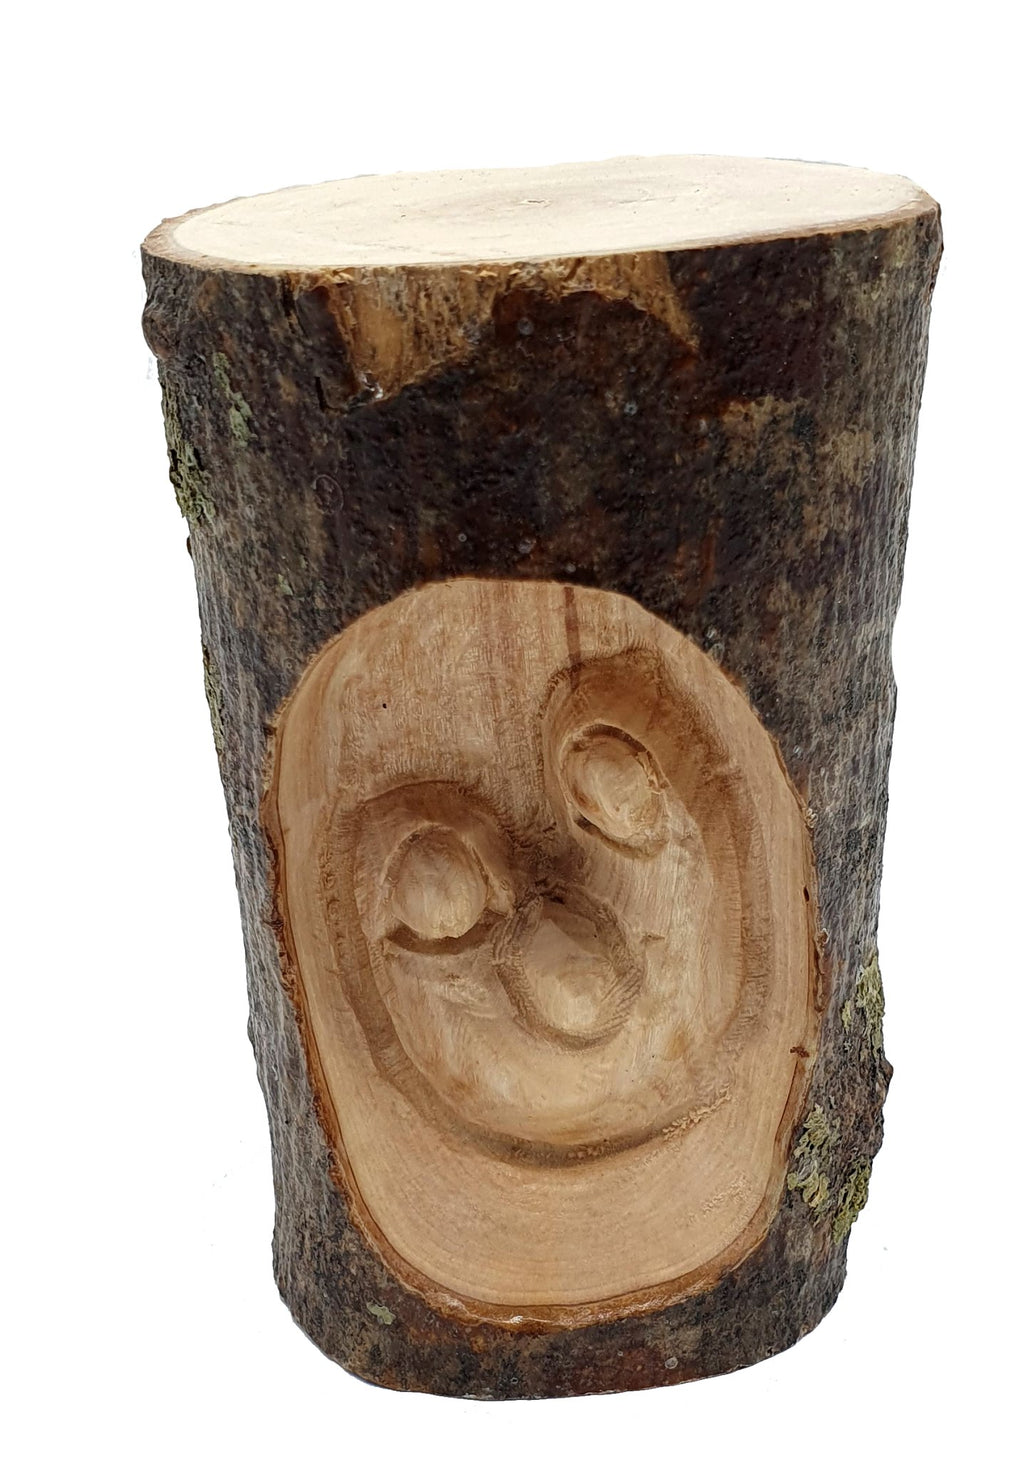 Holy Family' Carved inside a Natural Olive Wood Branch - 4.1 Inches - Olive Wood Holy Family Figurine from the Holy Land - Zuluf